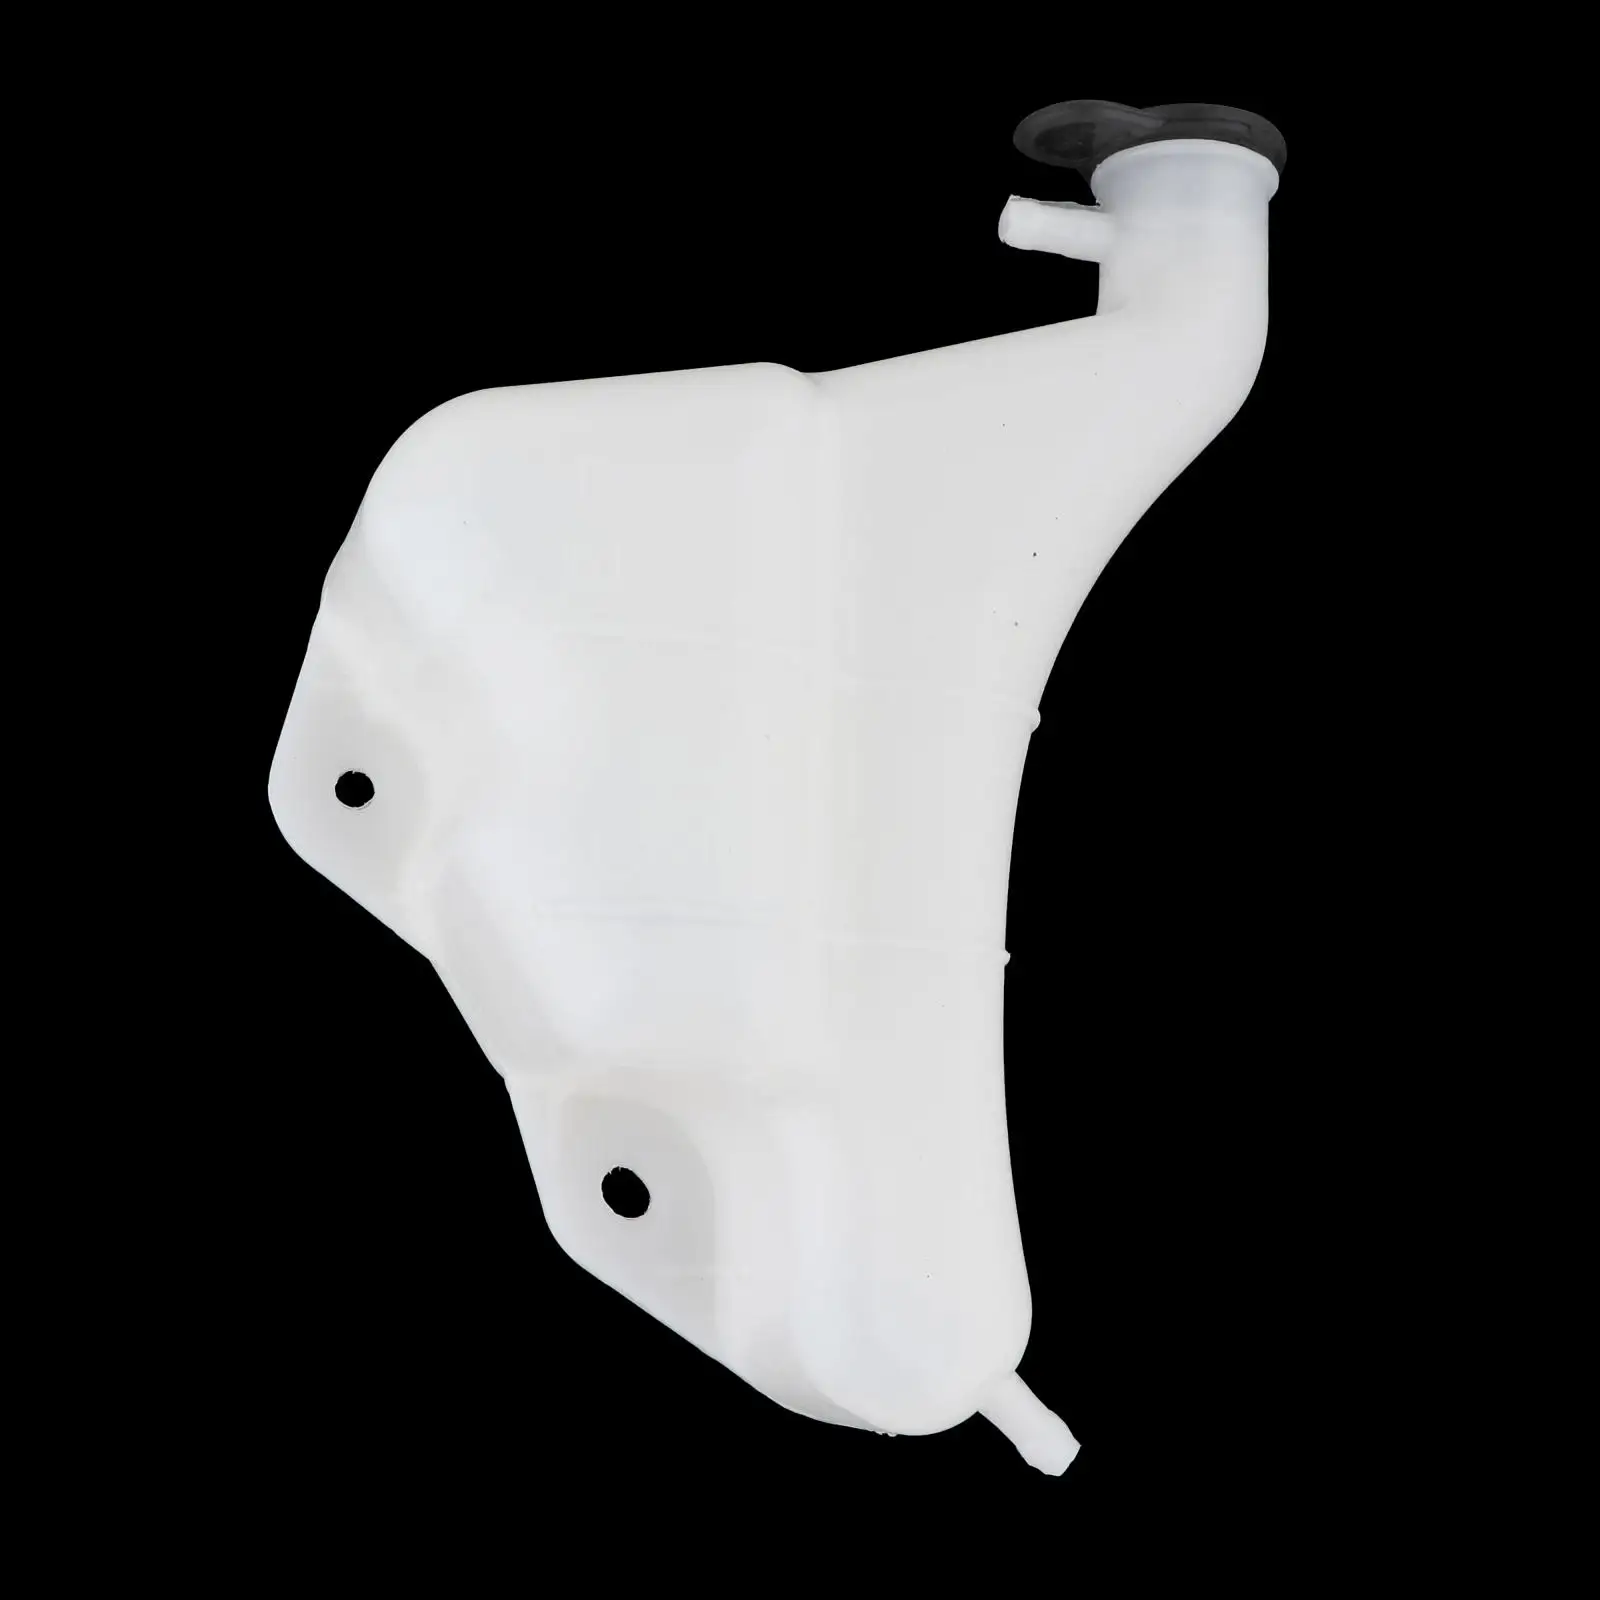 Overflow Coolant Radiator Tank Reservoir for Yamaha Raptor 700 2011 2006 2009 2007 Replacement Parts Accessories